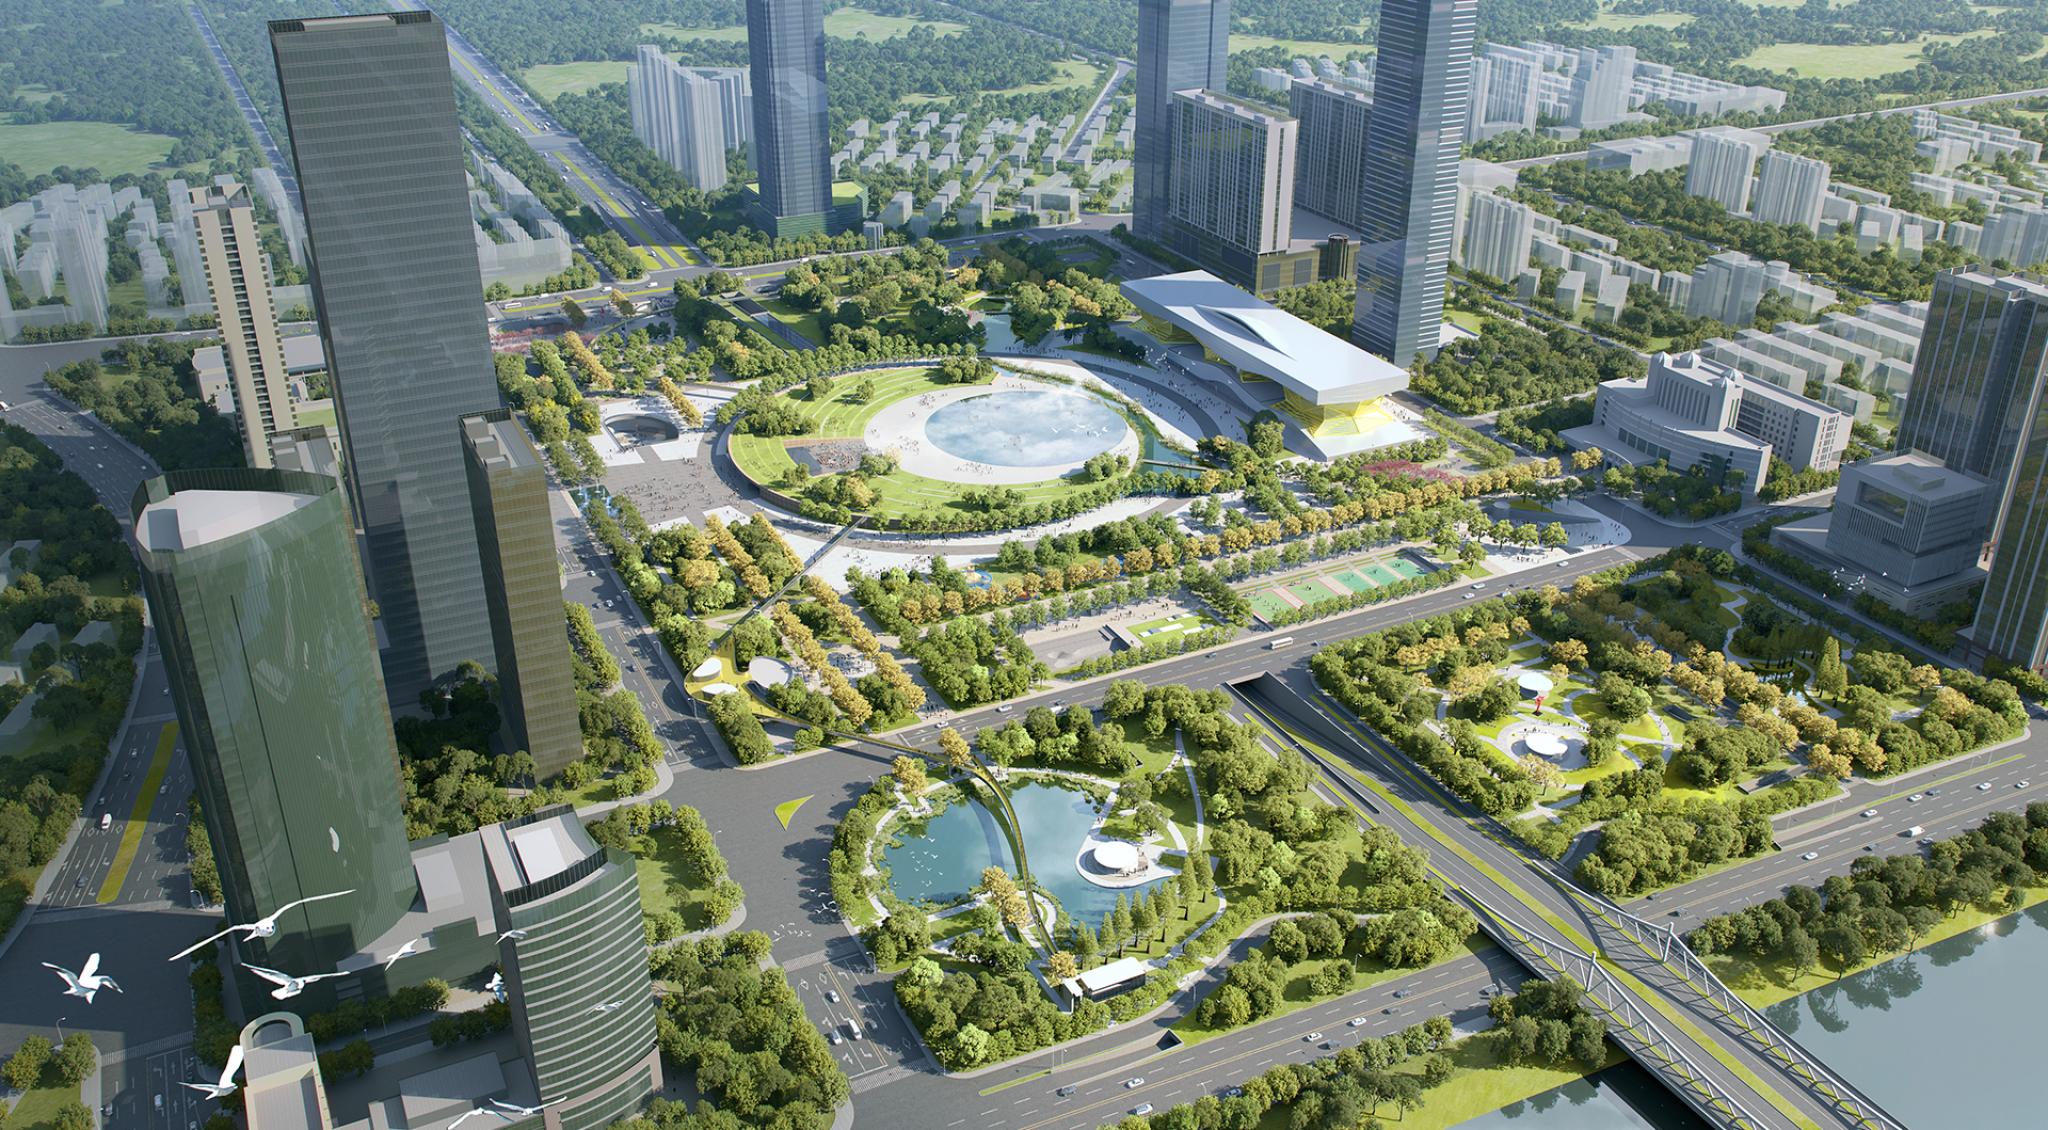 A new age for Wuxi - Lake Tai Park reimagined